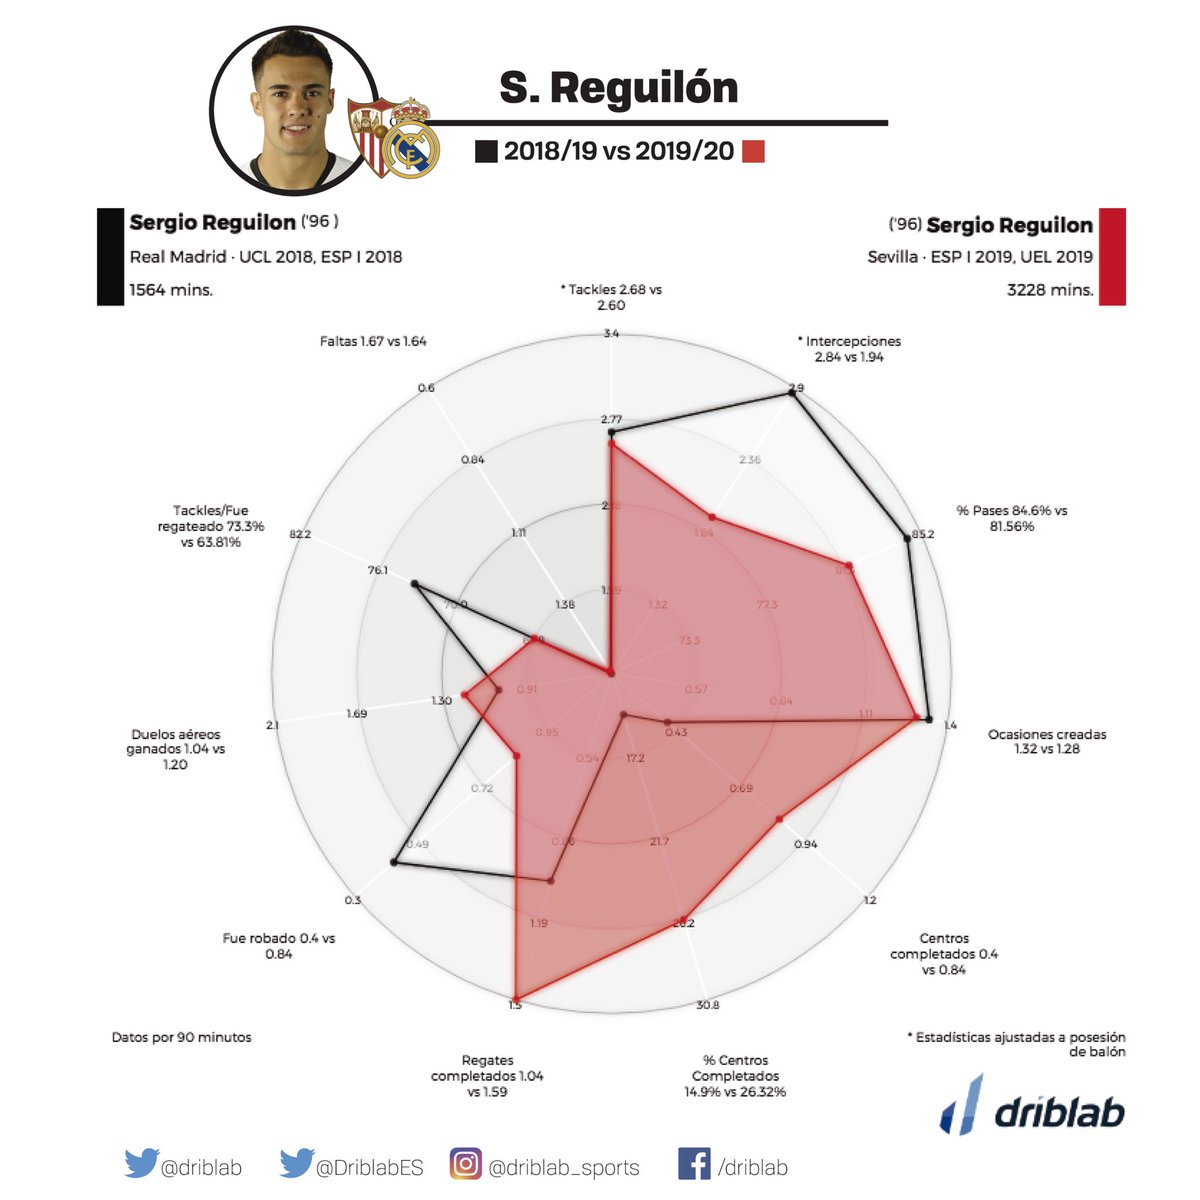 DribLab: Does Reguilón have space at Real Madrid? Does it make sense to sell him seeing the shortage of left backs in the market?